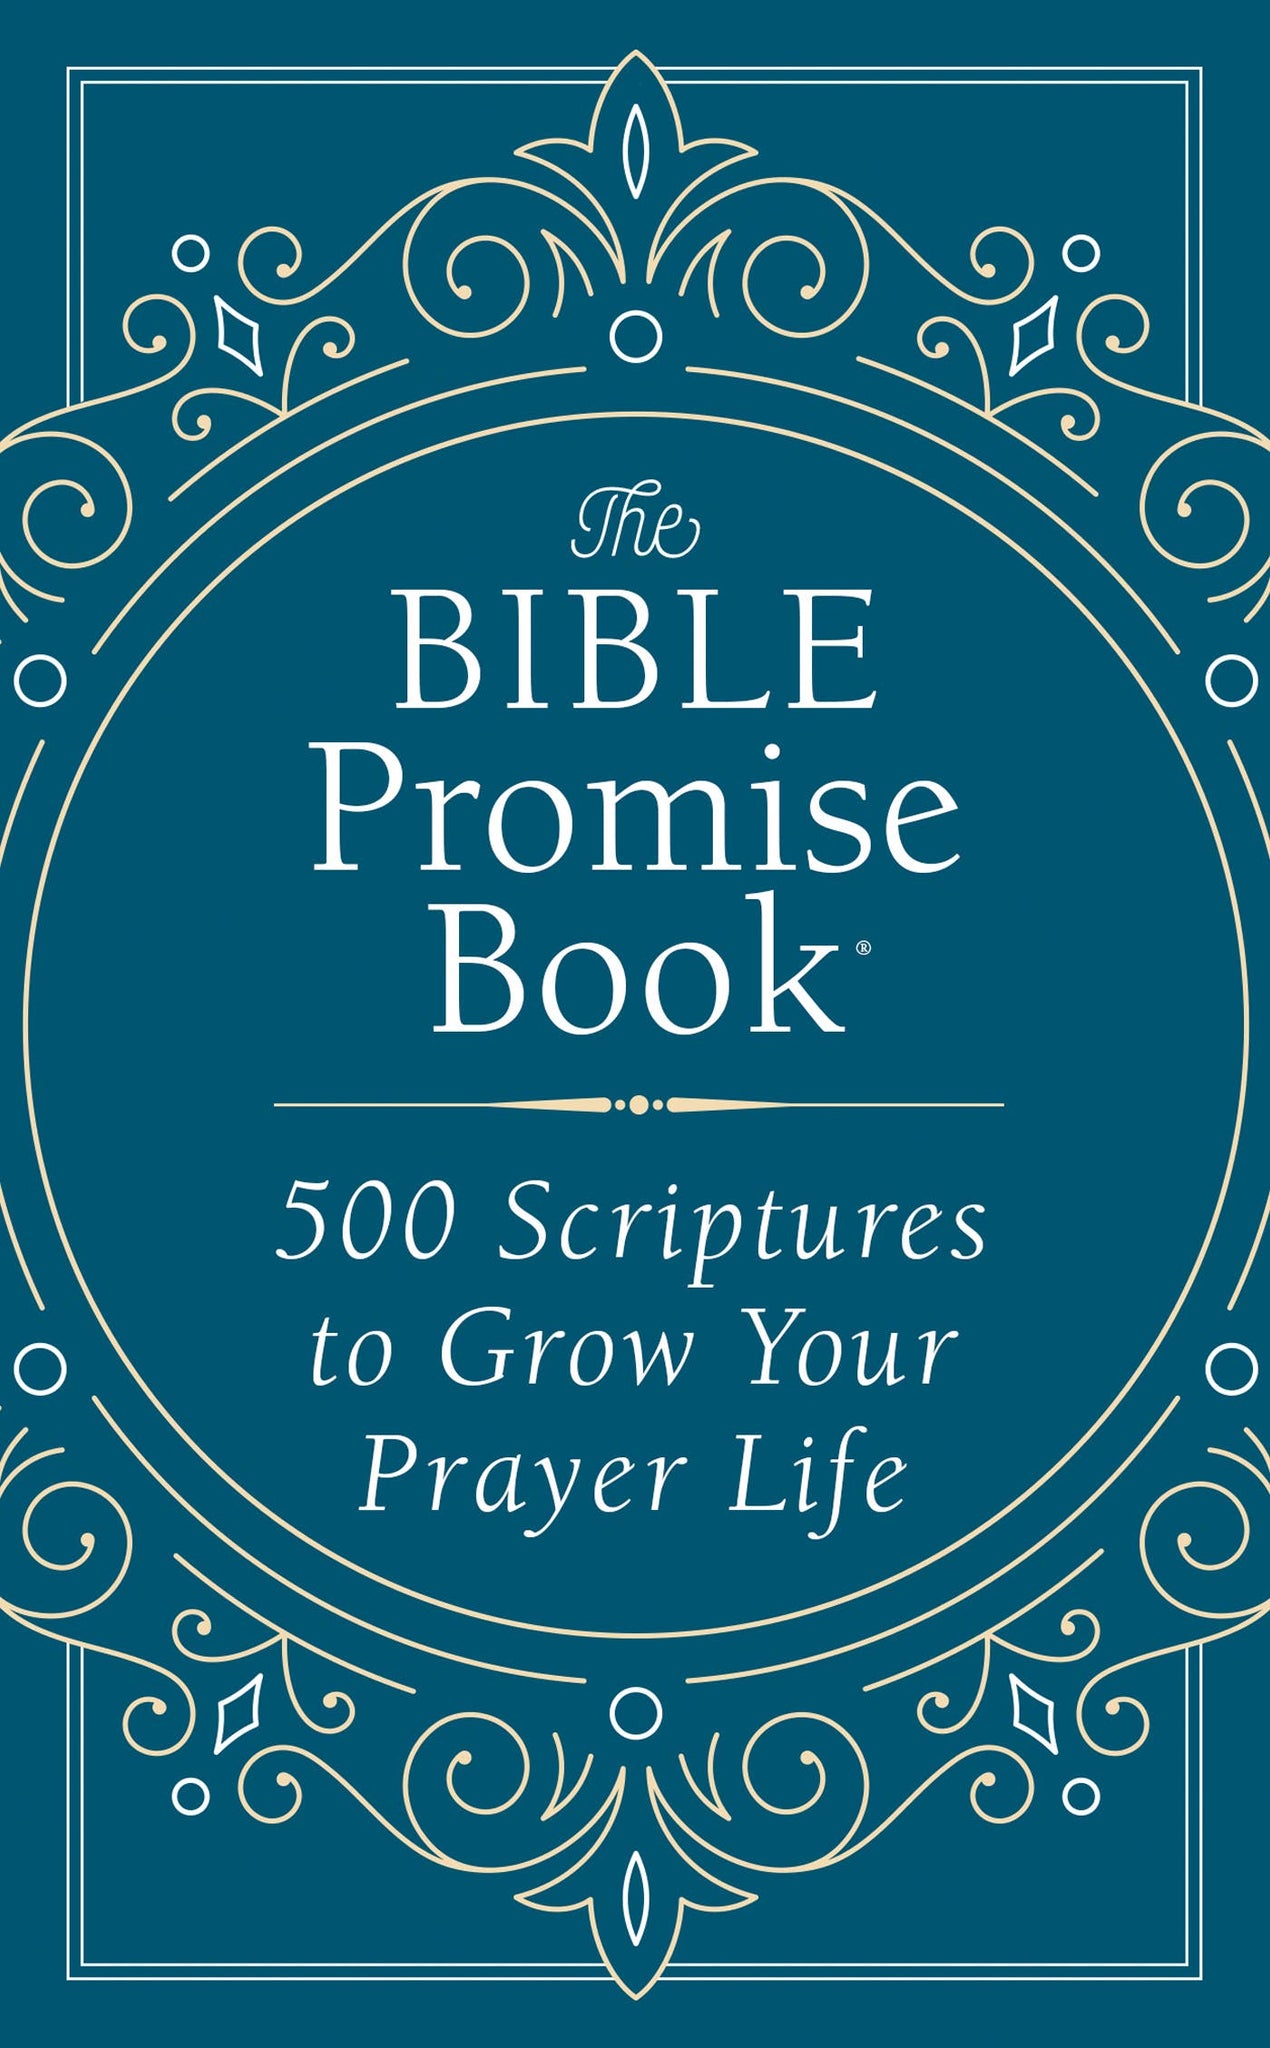 The Bible Promise Book - 500 Scriptures to Grow